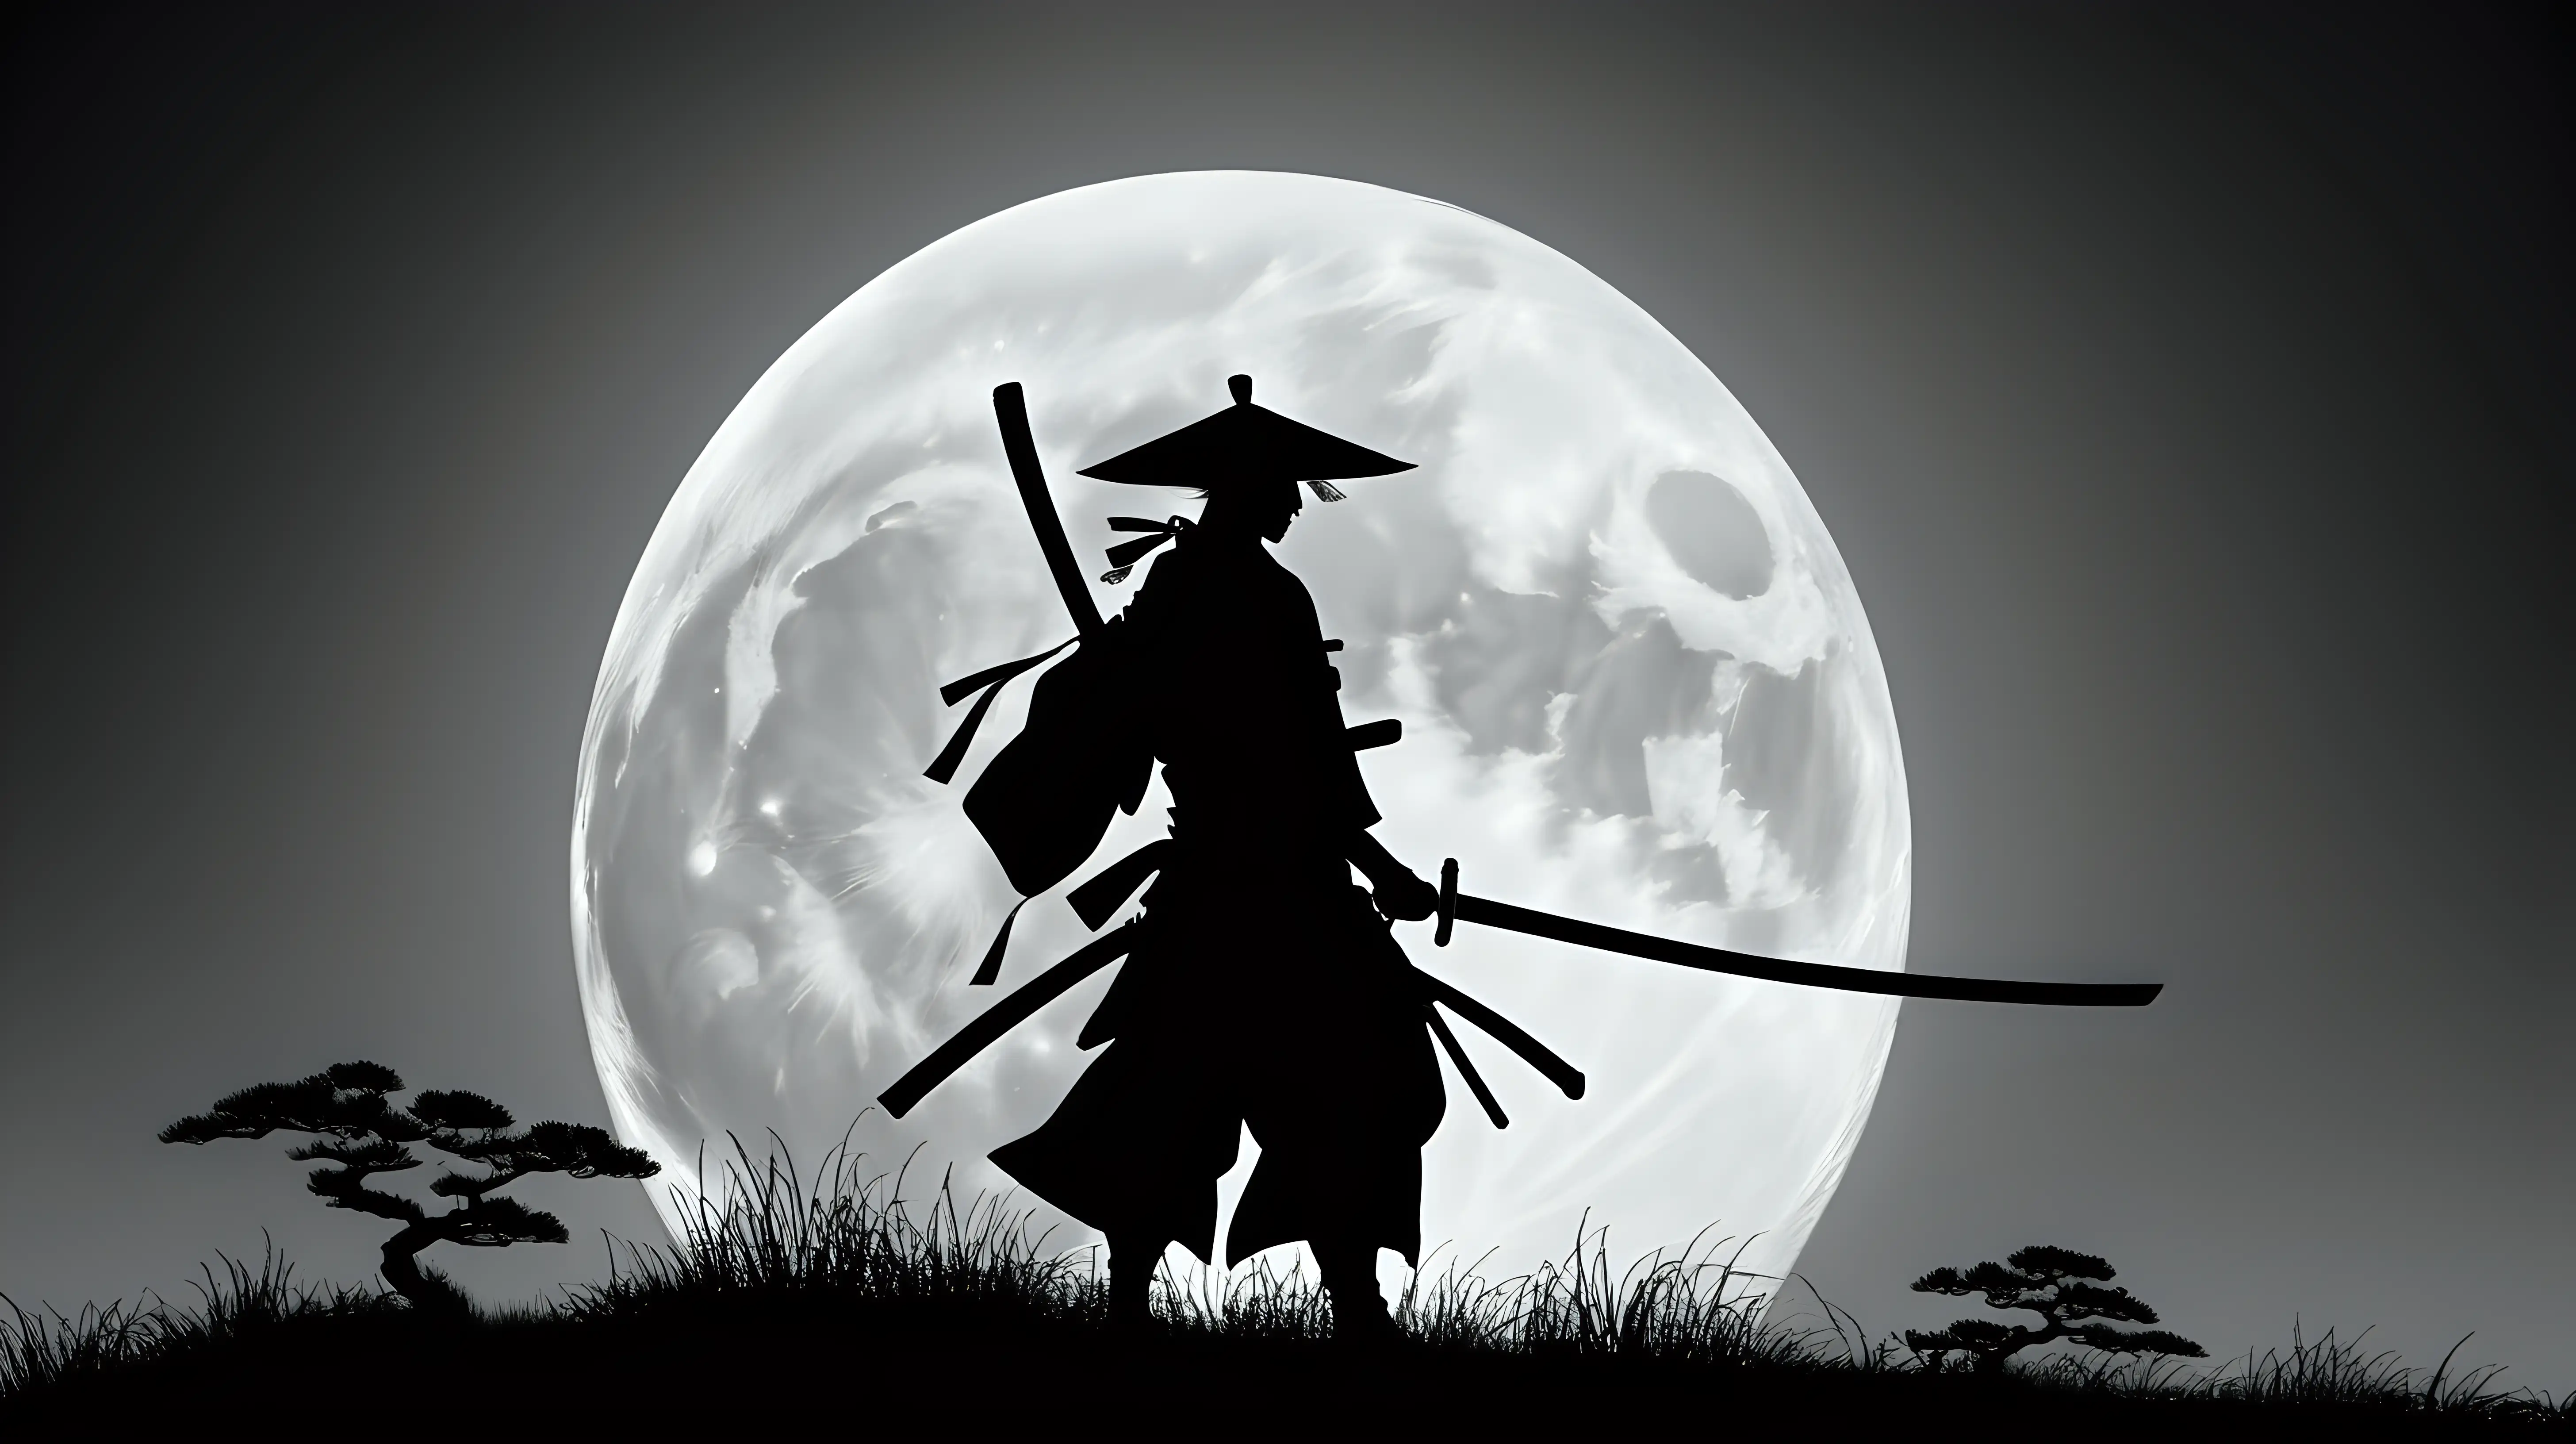 A silhouette of a samurai framed against the backdrop of a full moon, his katana drawn and ready, his figure shrouded in mystery and shadow.